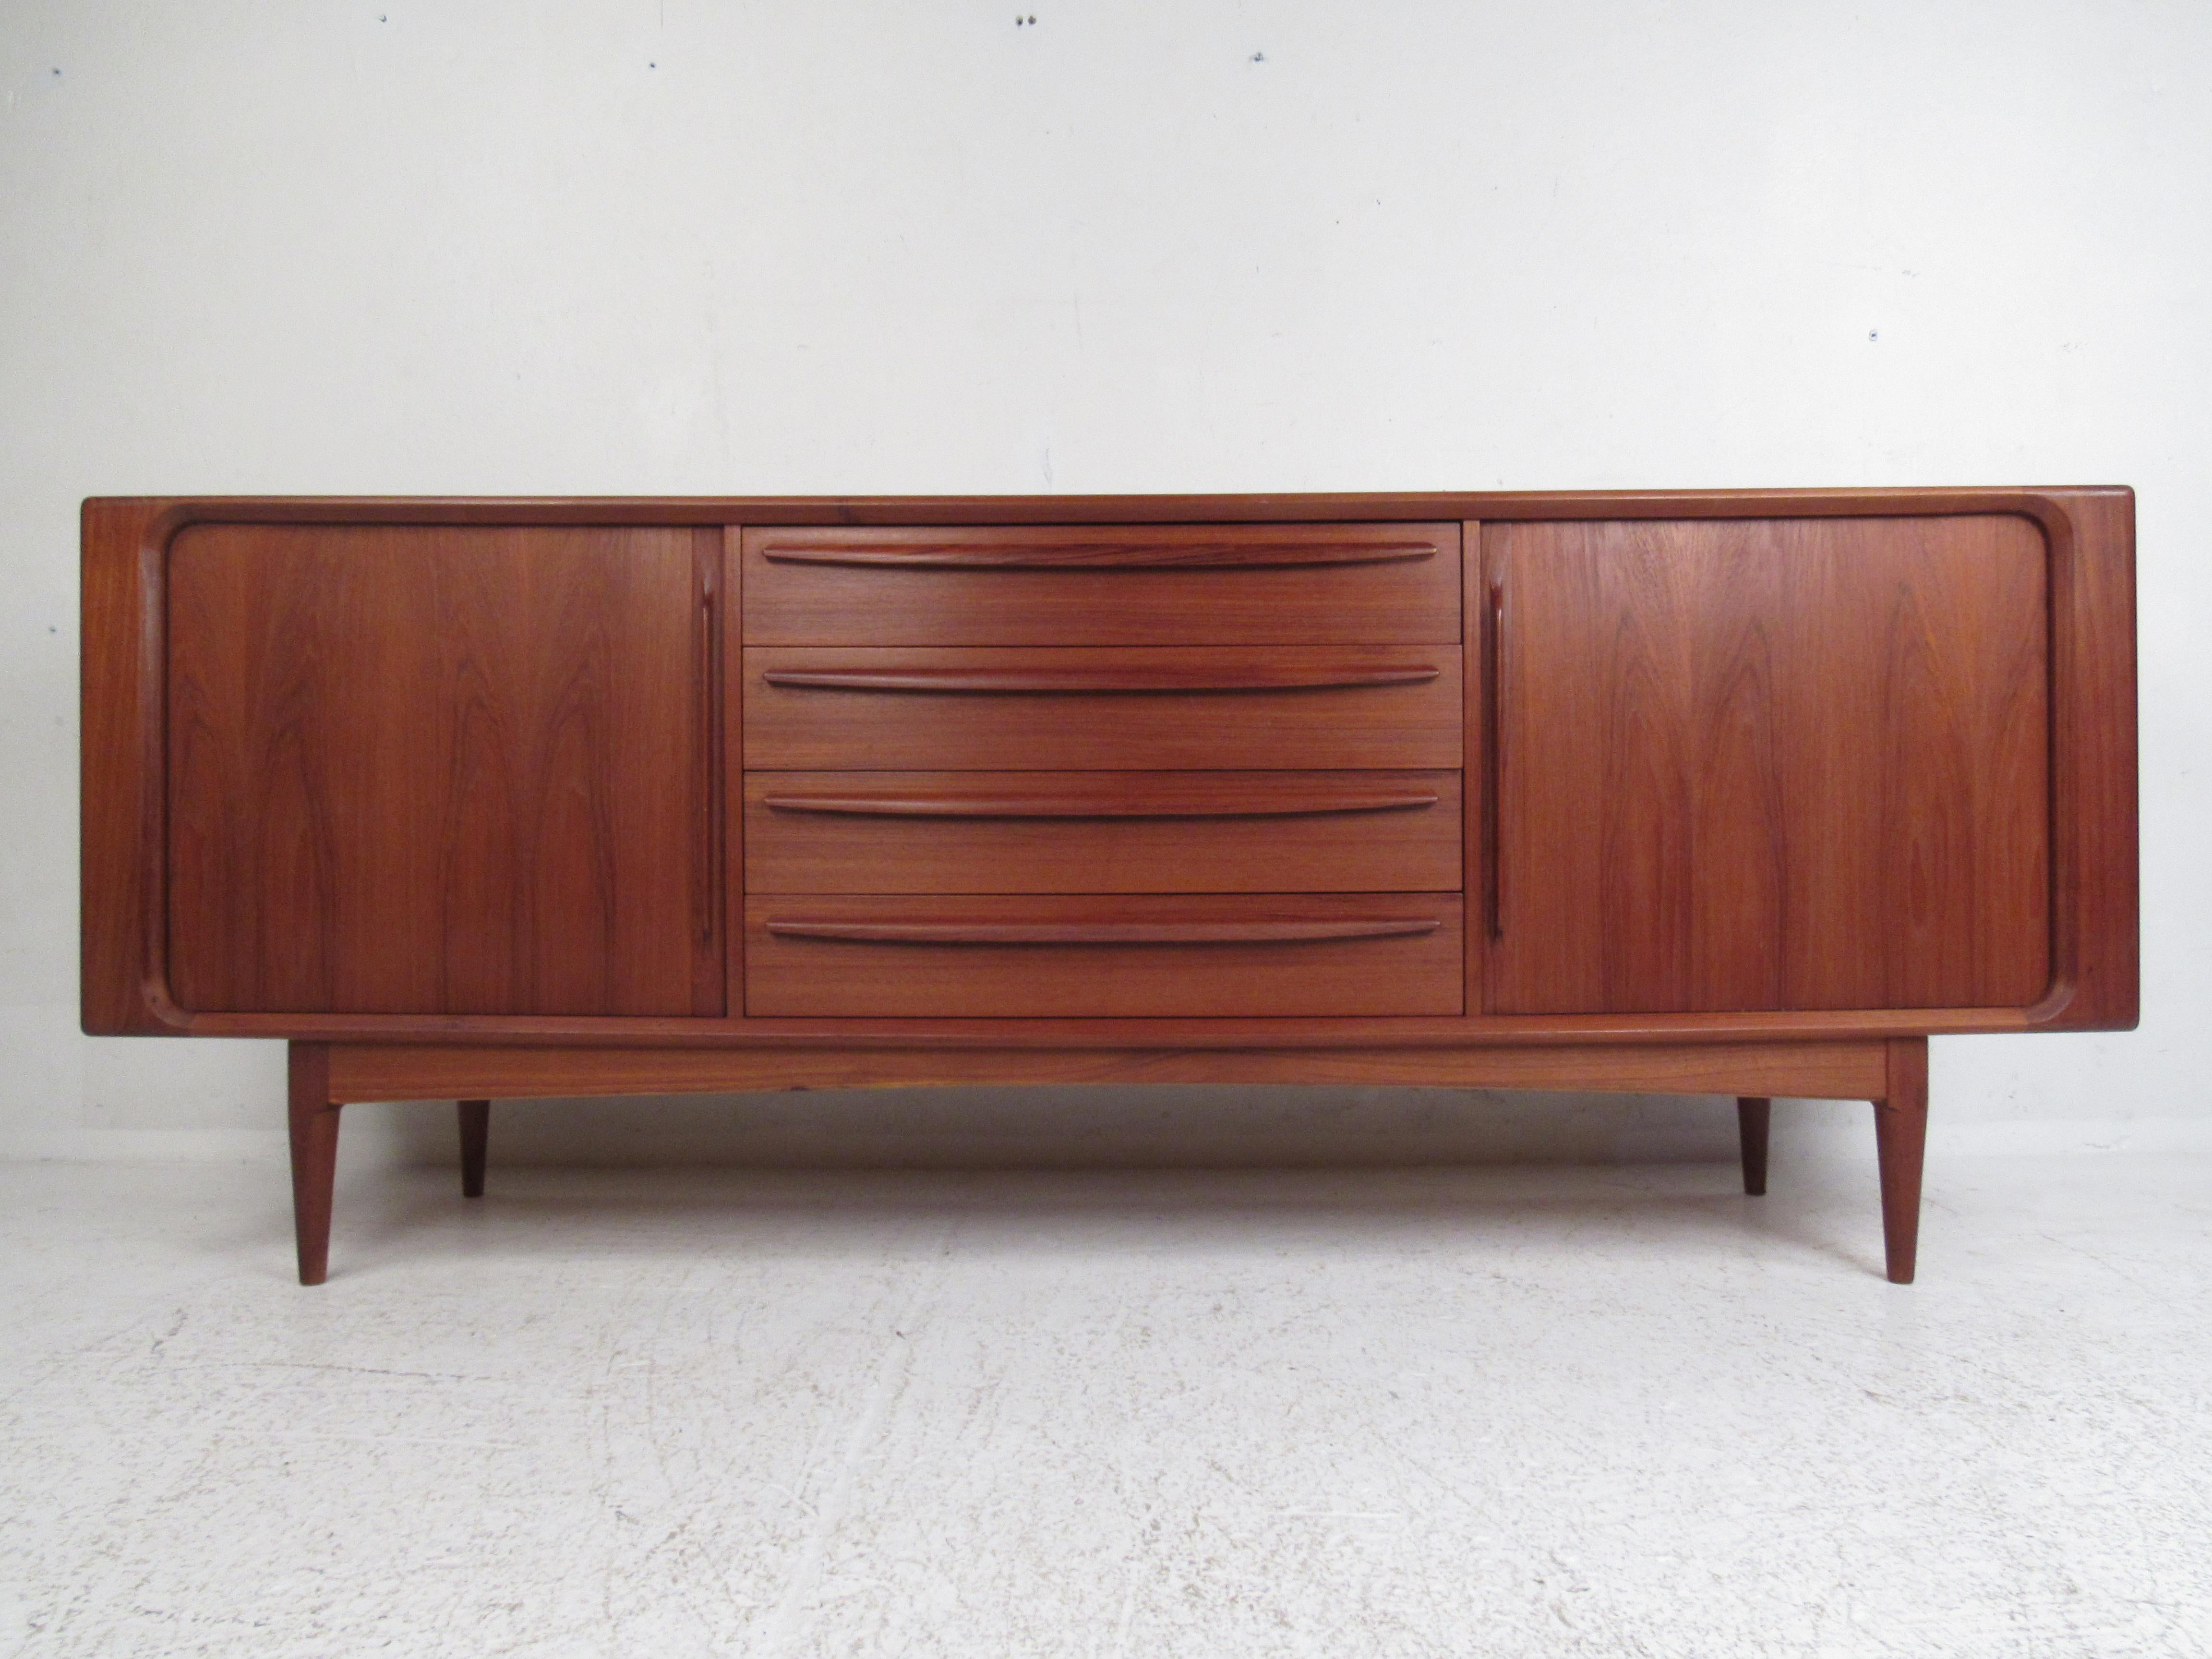 This exquisite vintage modern dresser offers plenty of room for storage within its ten hefty drawers. A unique design that features curved front drawers with dovetail joints, hidden by tambour doors. This stunning Danish modern case piece has a